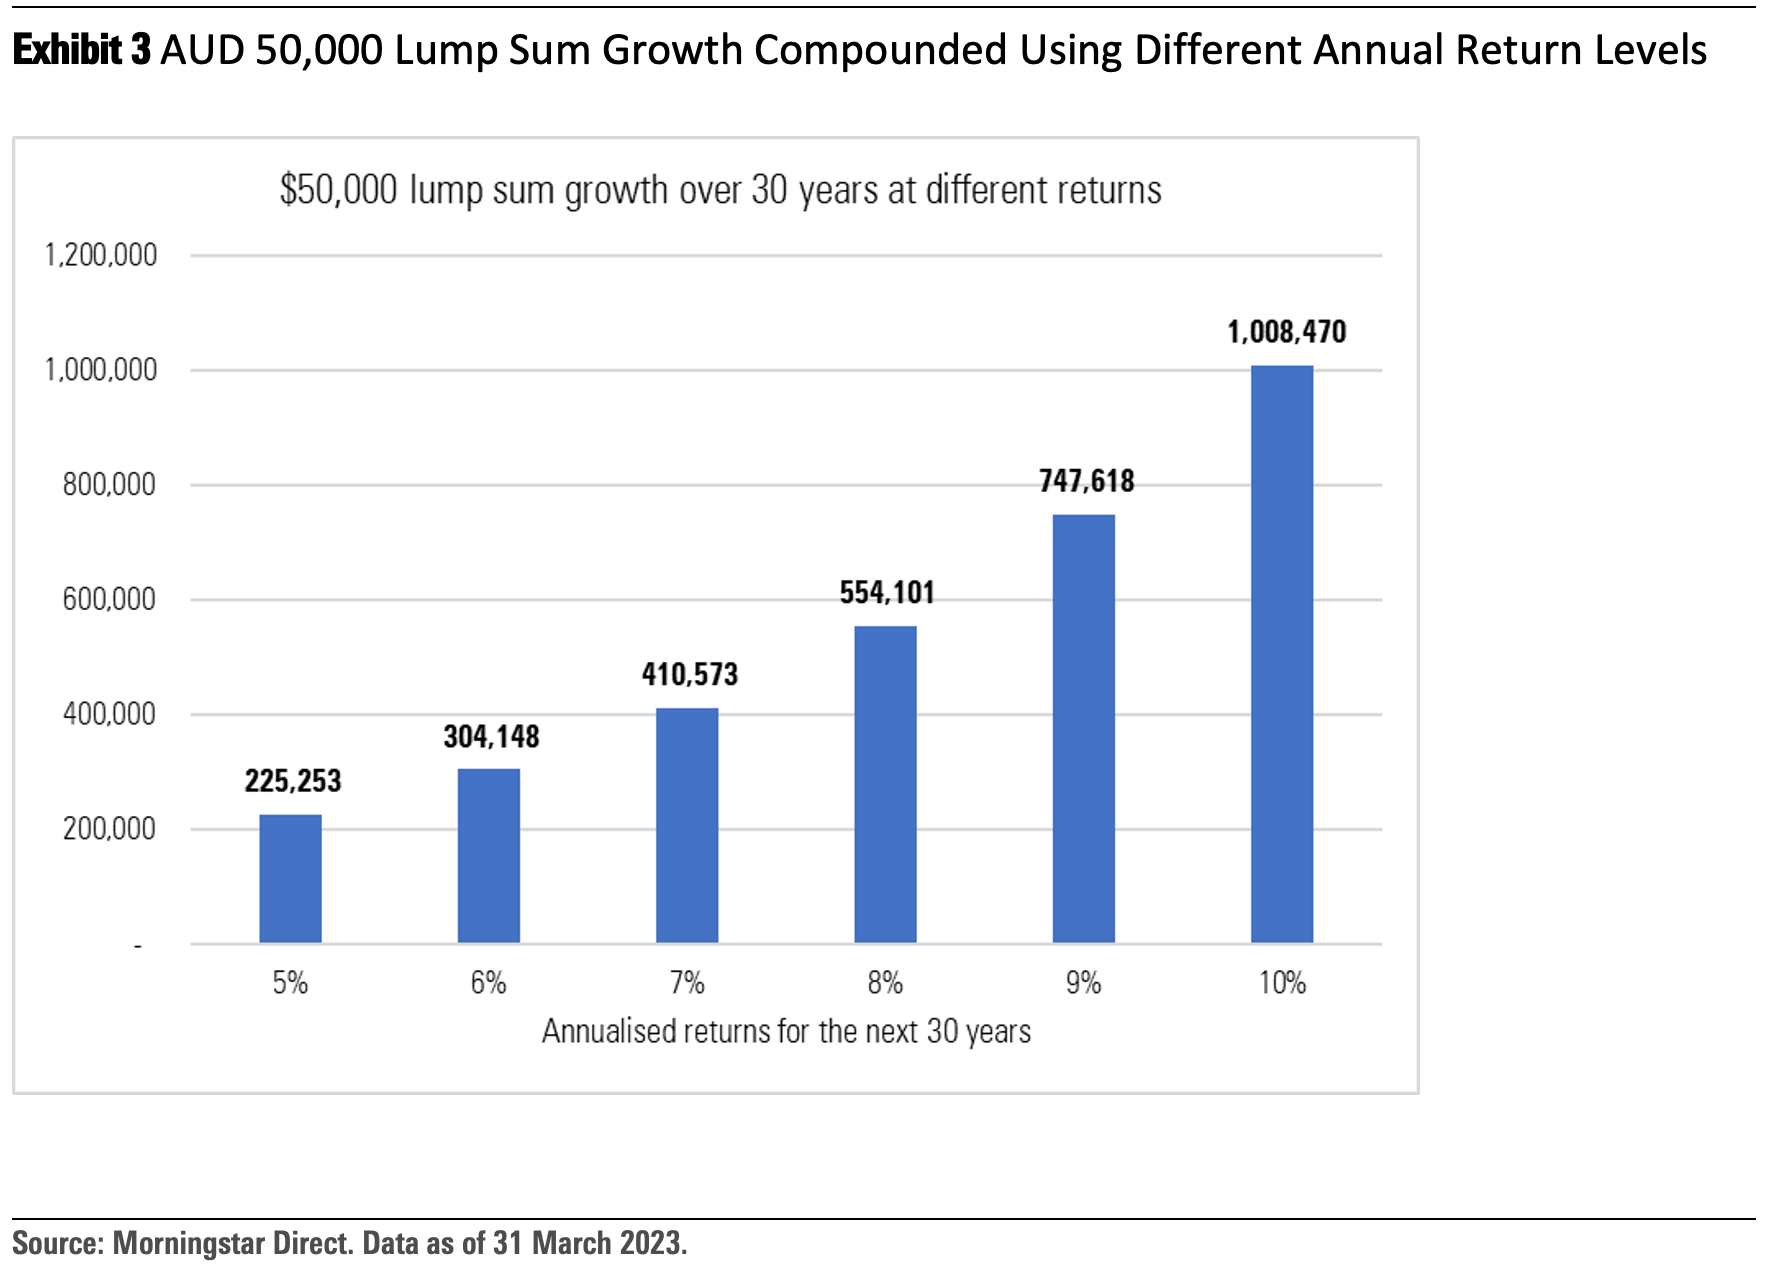 Compounding effect